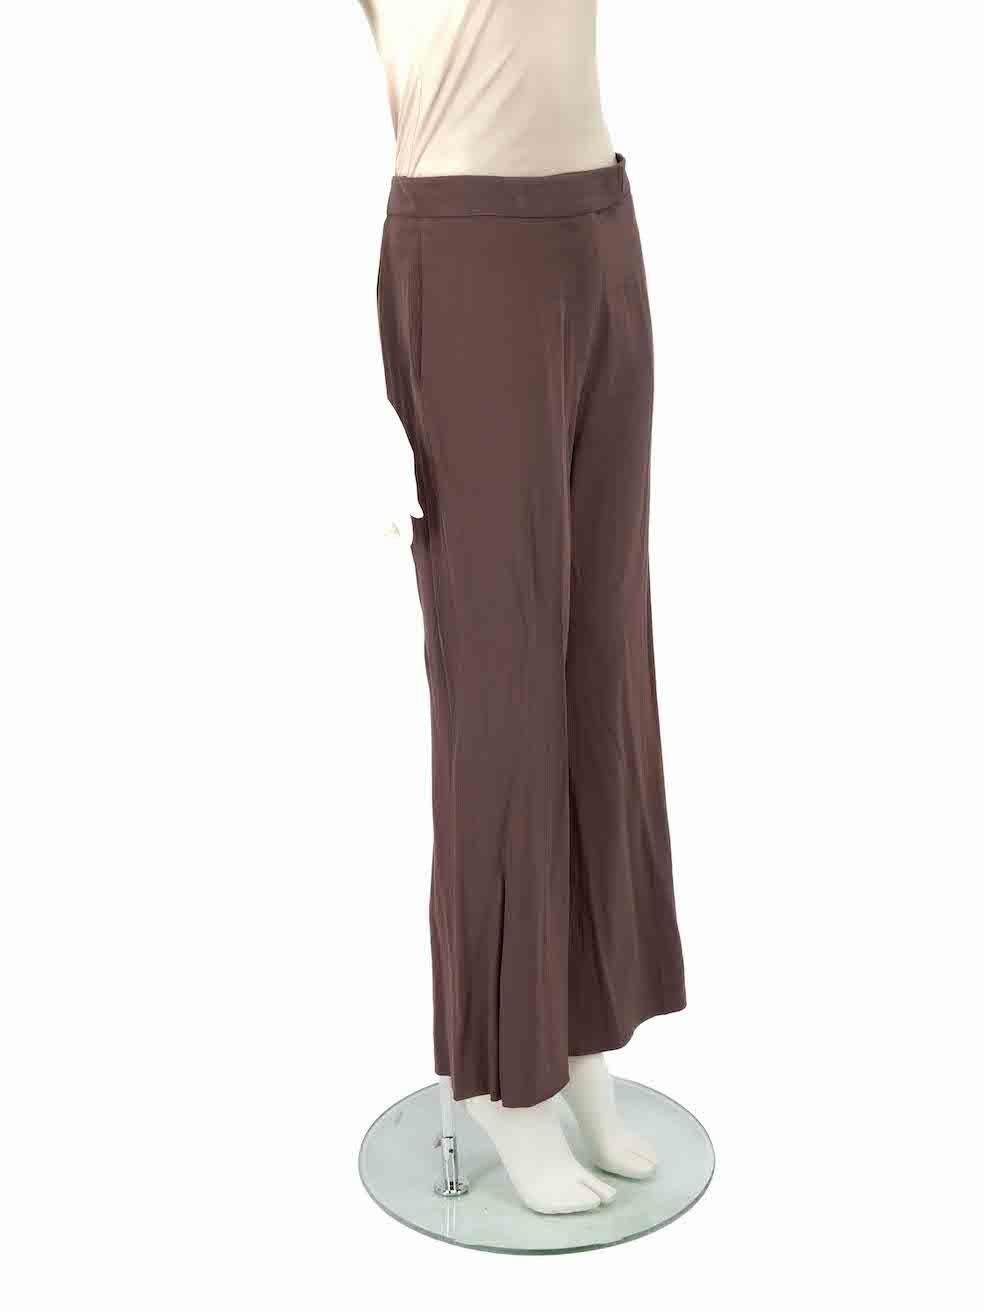 CONDITION is Very good. Minimal wear to trousers is evident with a small mark evident on the front wasitband on this used Chloé designer resale item.
 
 
 
 Details
 
 
 Brown
 
 Synthetic
 
 Trousers
 
 Straight leg
 
 High rise
 
 2x Side pockets
